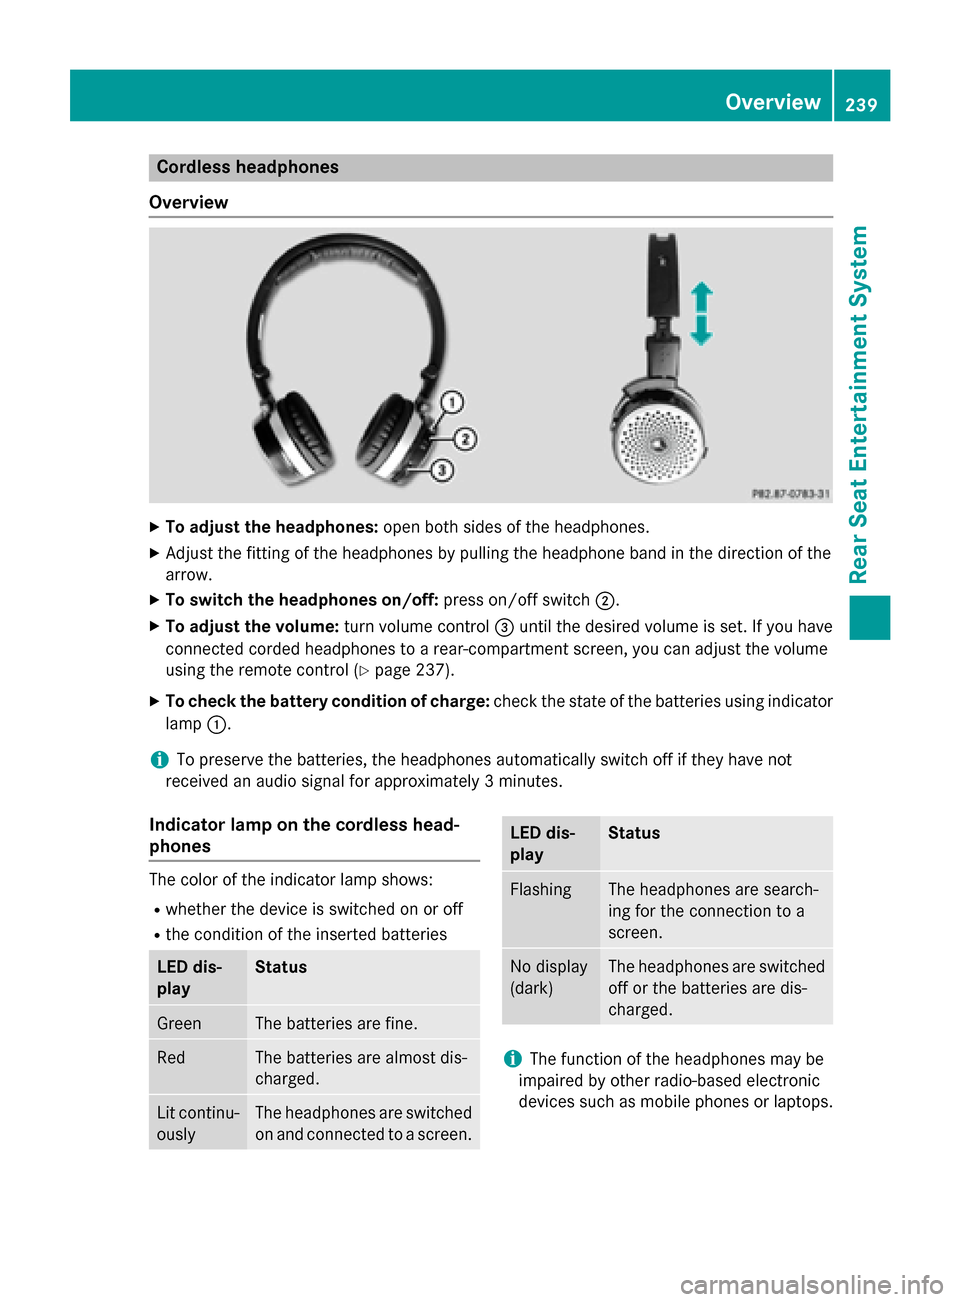 MERCEDES-BENZ B-Class 2014 W246 Comand Manual Cordless headphones
Overview X
To adjust the headphones: open both sides of the headphones.
X Adjust the fitting of the headphones by pulling the headphone band in the direction of the
arrow.
X To swi